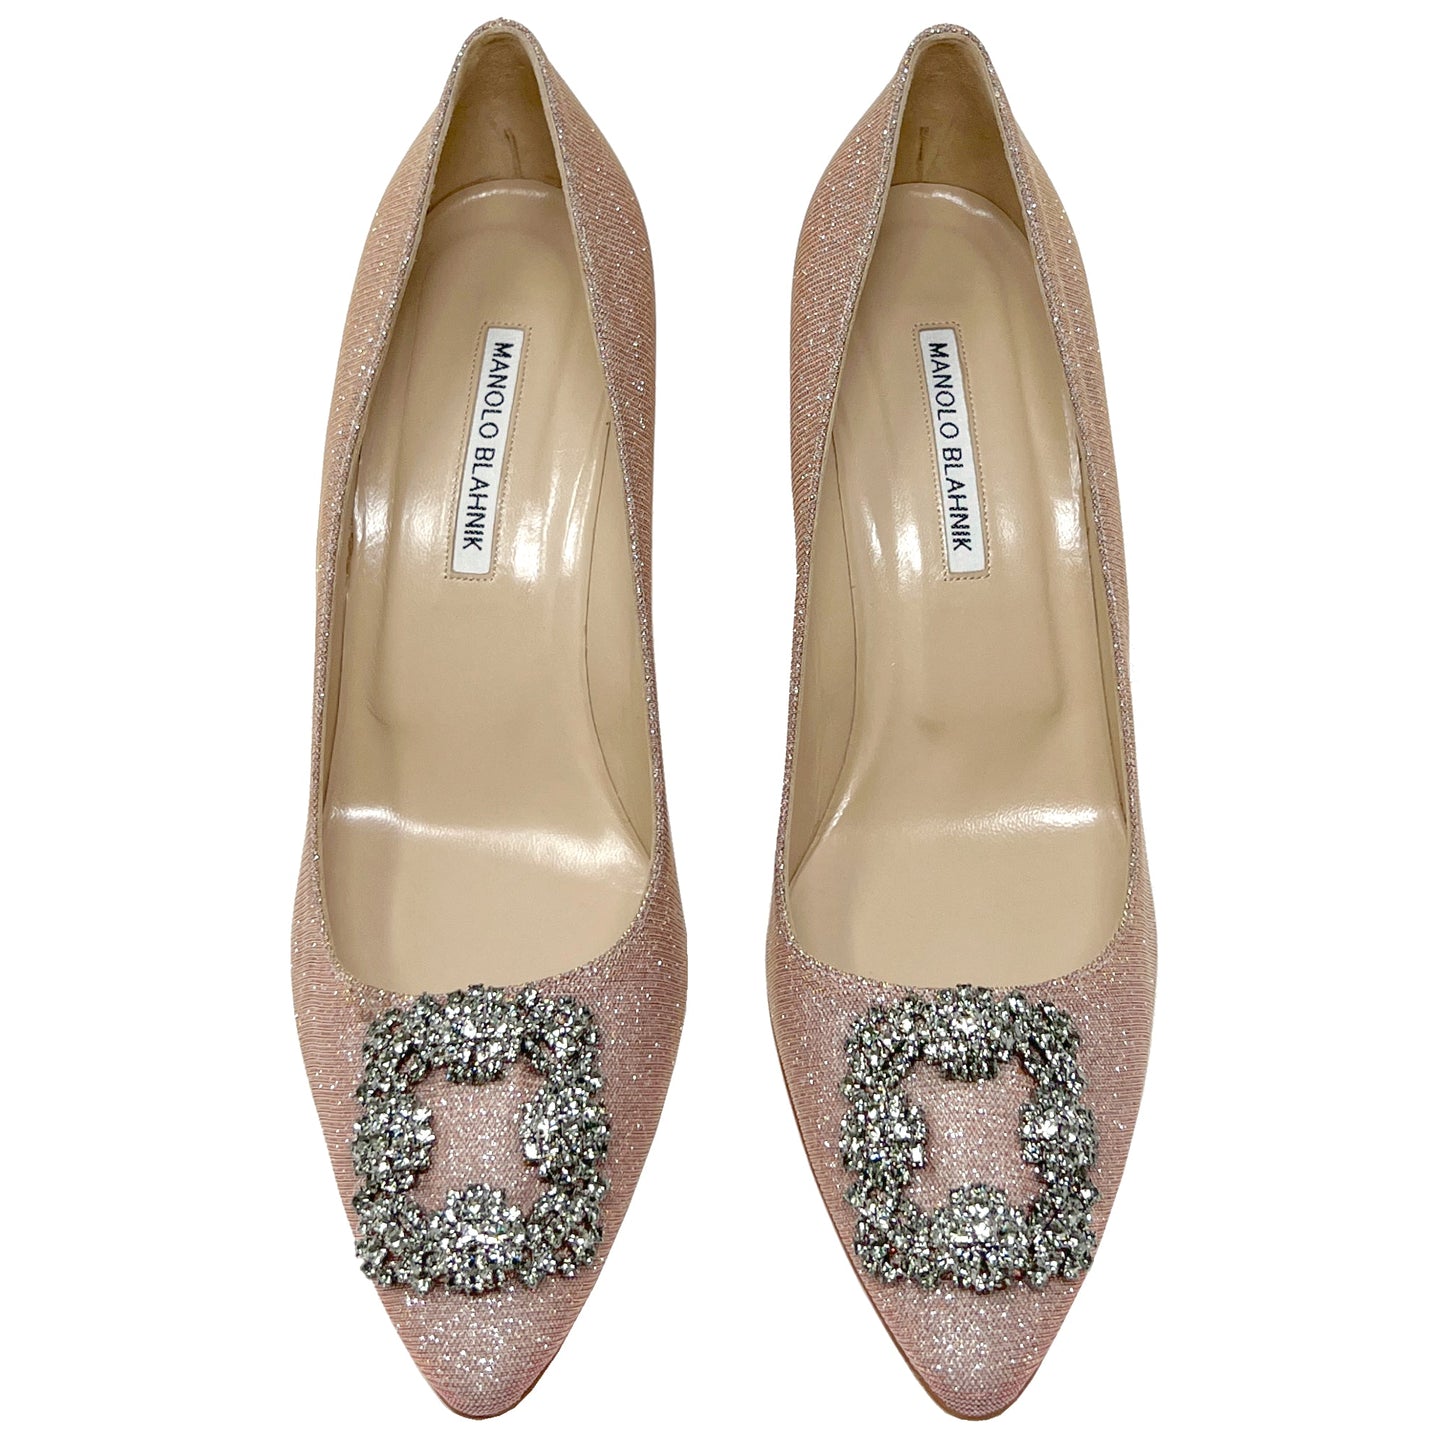 Manolo Blahnik Hangisi 70 Pink Shimmer Fabric Crystal Buckle Pointed Heels Pumps Size EU 41